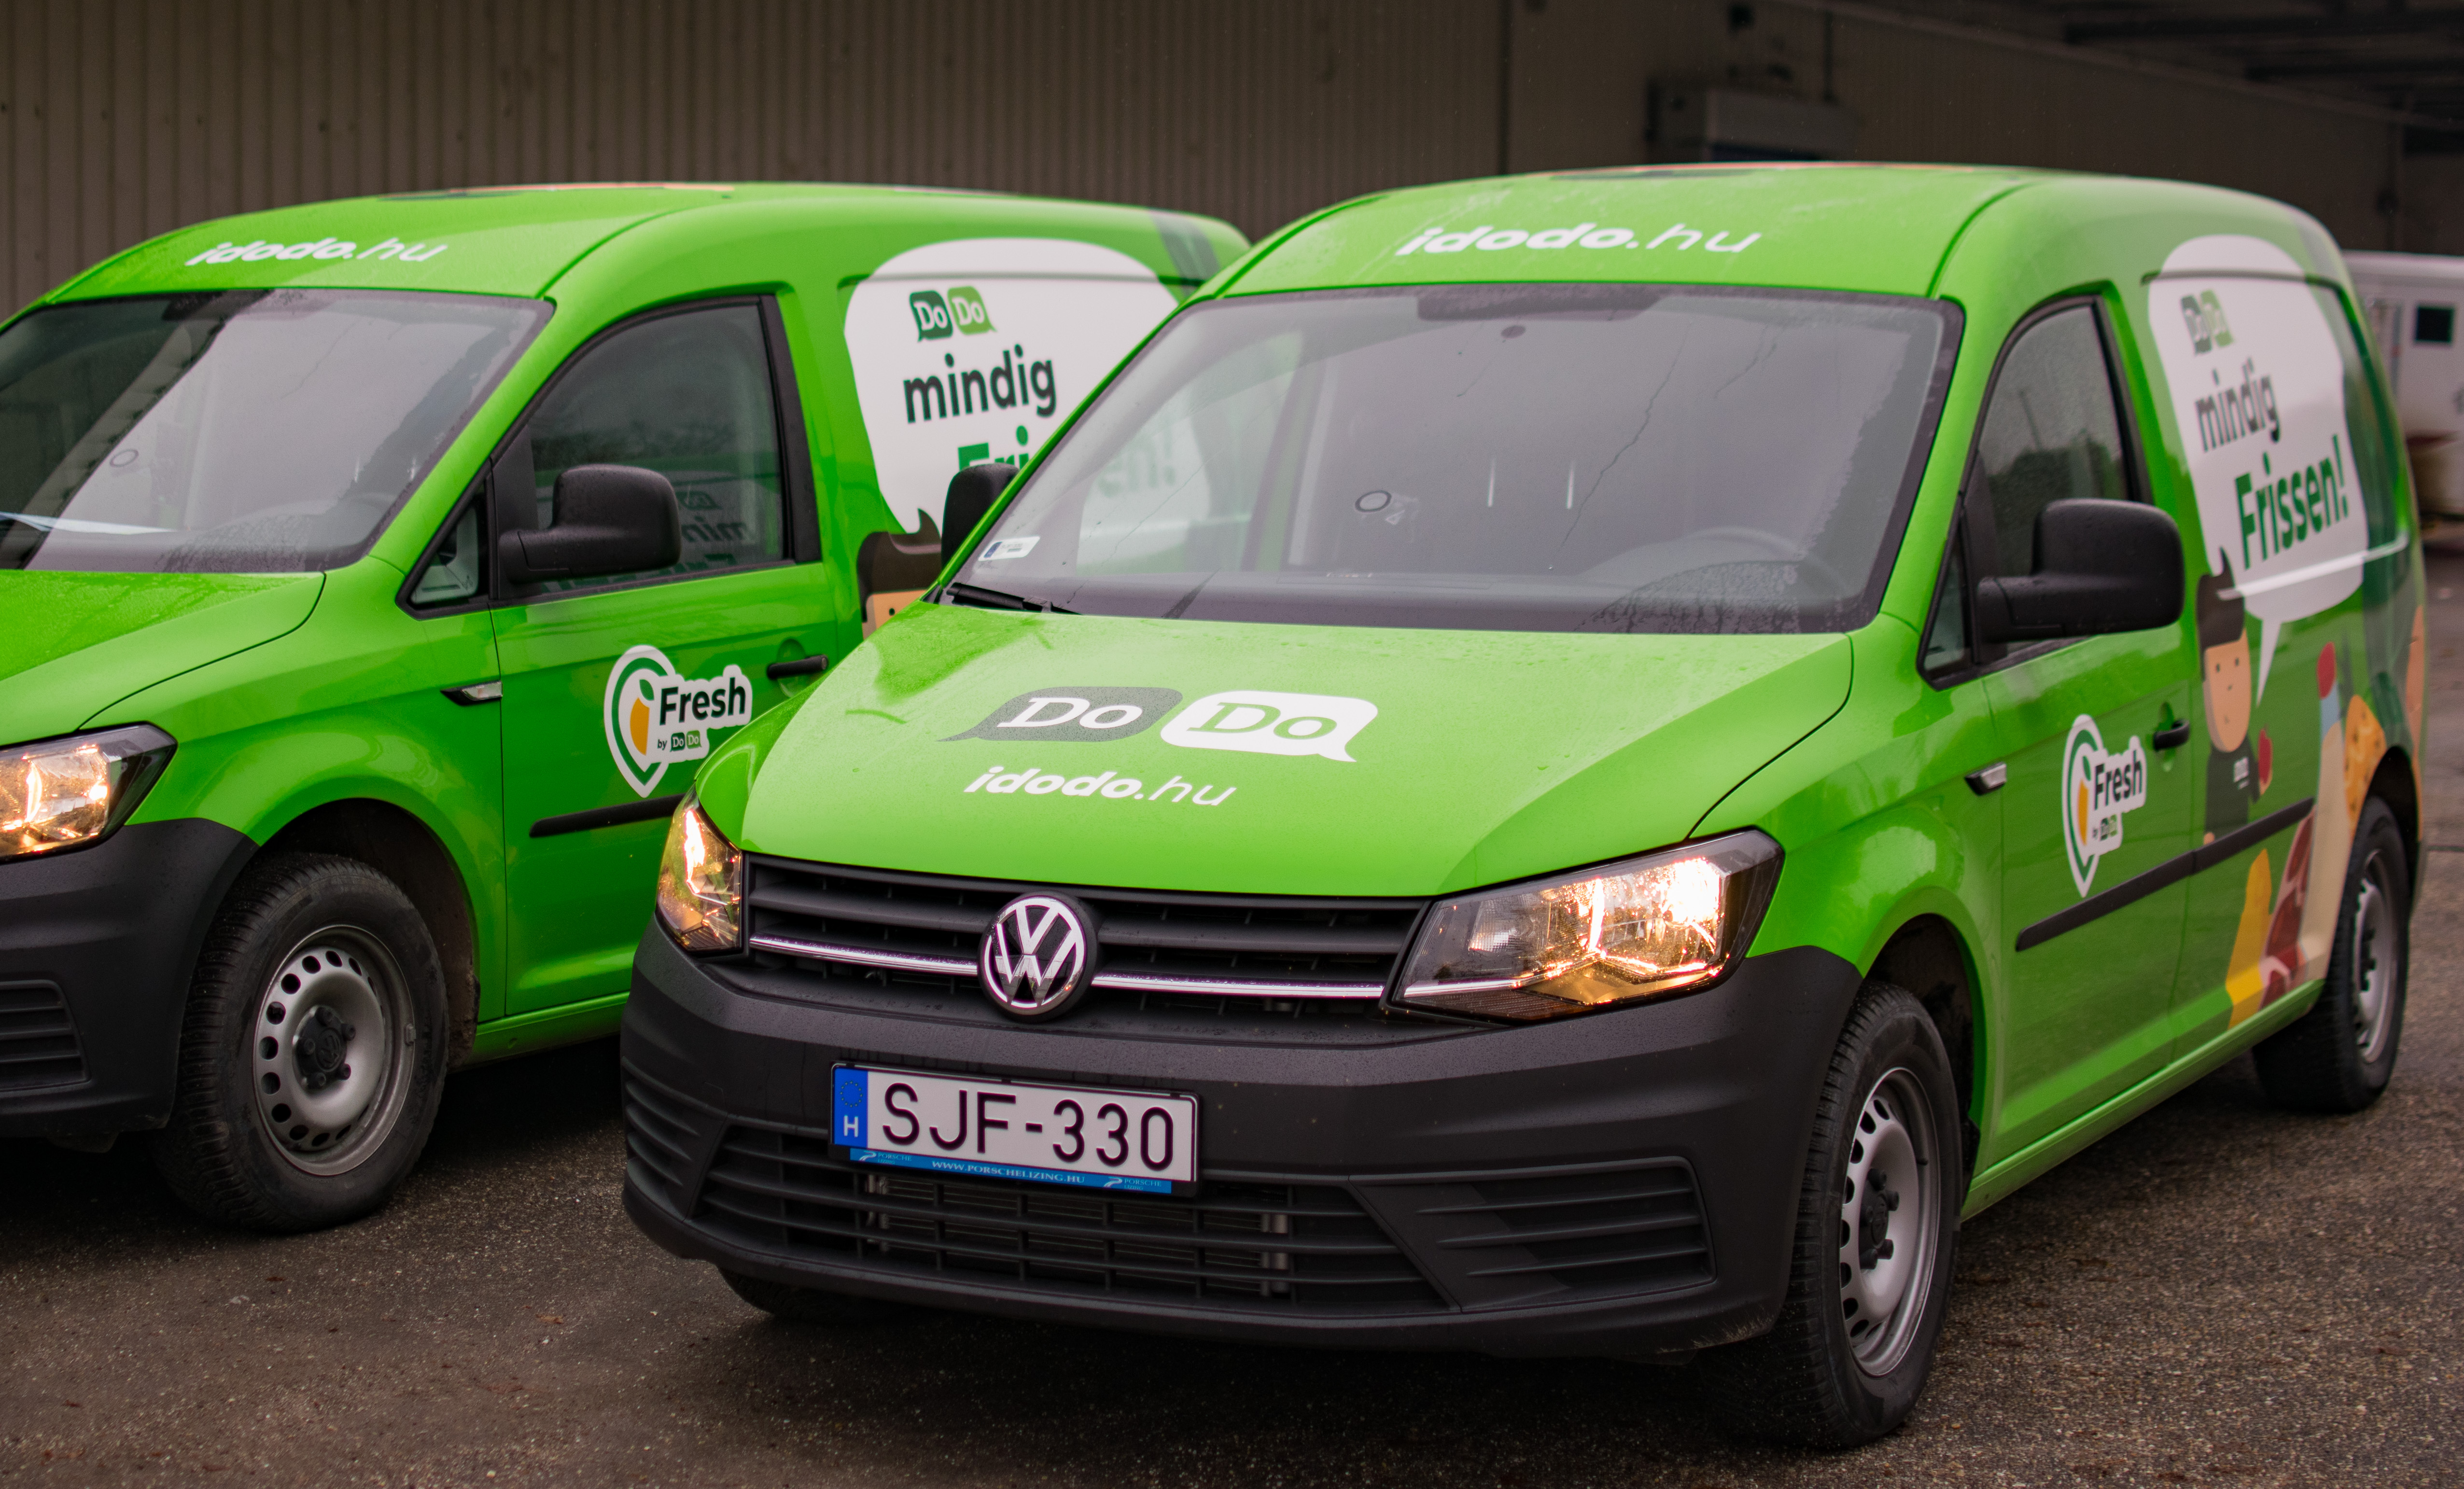 DoDo aiming to revolutionize home delivery in Hungary